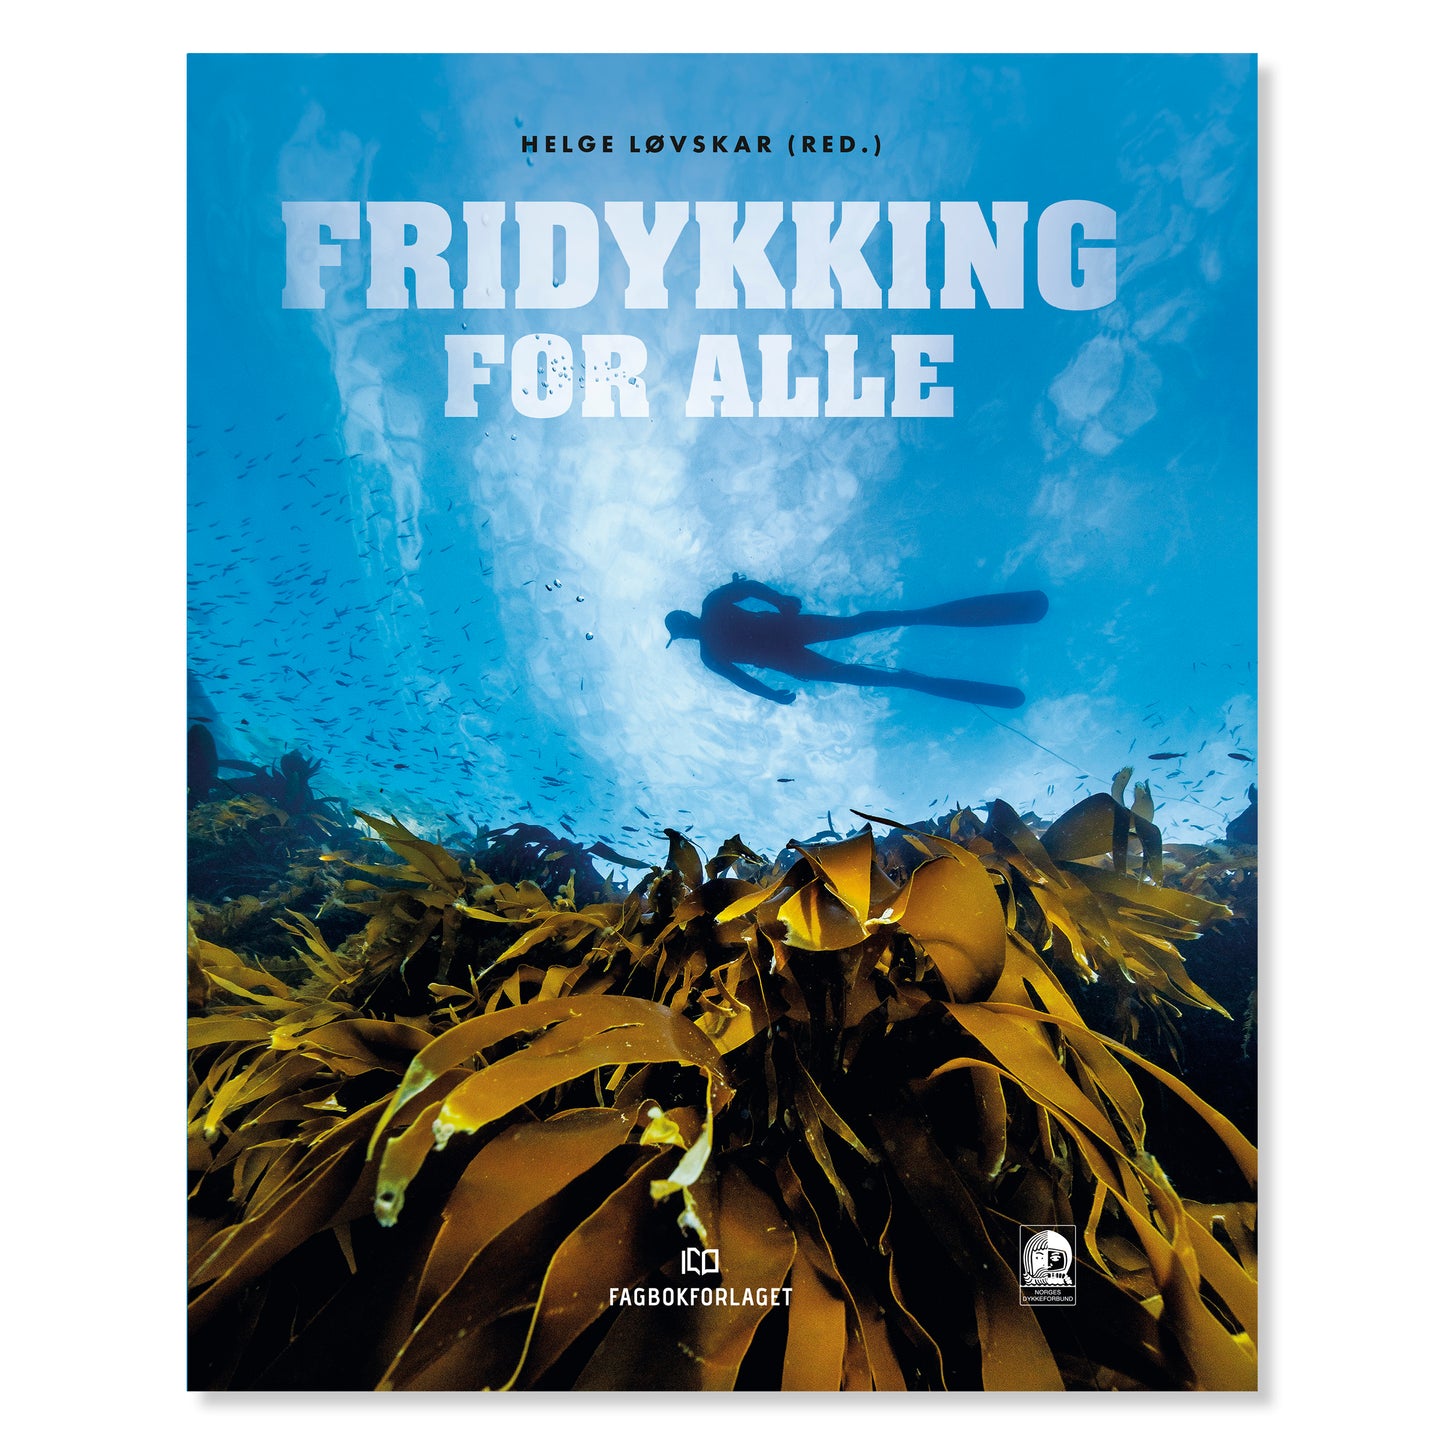 Freediving for everyone